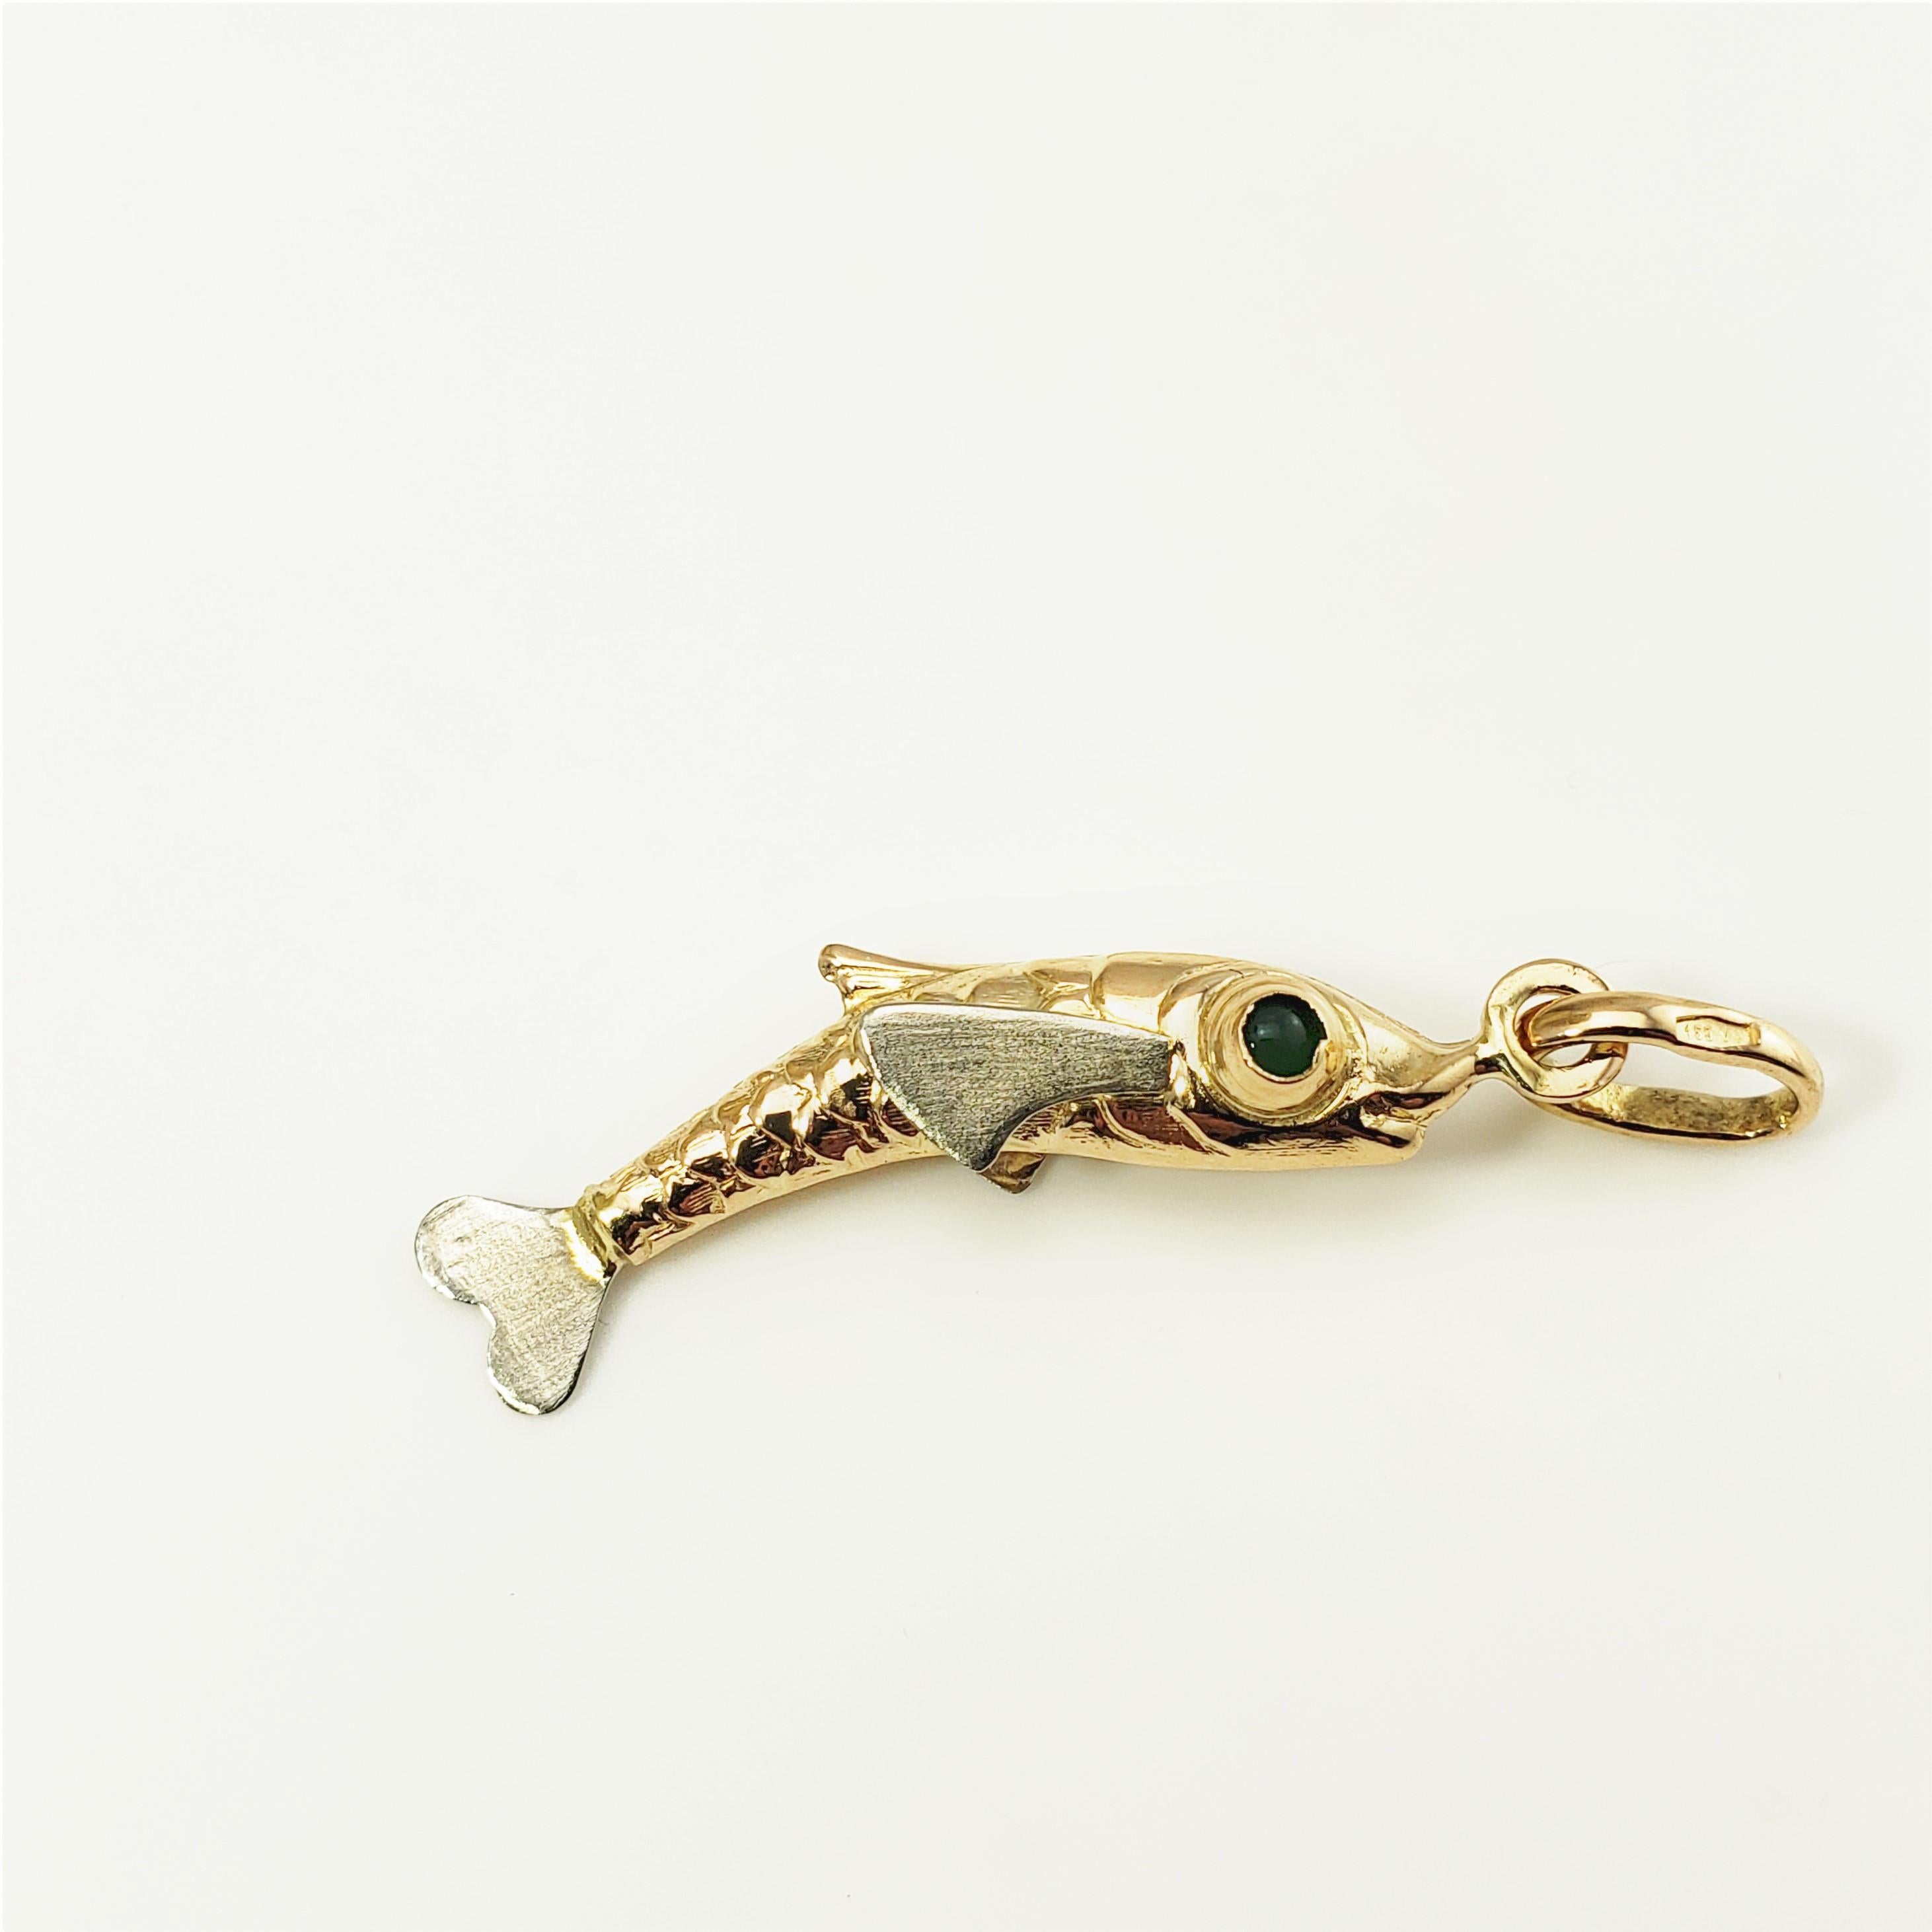 18 Karat Yellow Gold Fish Charm-

This 3D charm features a beautifully detailed fish accented with two emerald eyes.  Crafted in classic 18K yellow gold.

Size:  34 mm x  12 mm

Weight:  1.5 dwt. /  2.4 gr.

Stamped: 750

Very good condition,